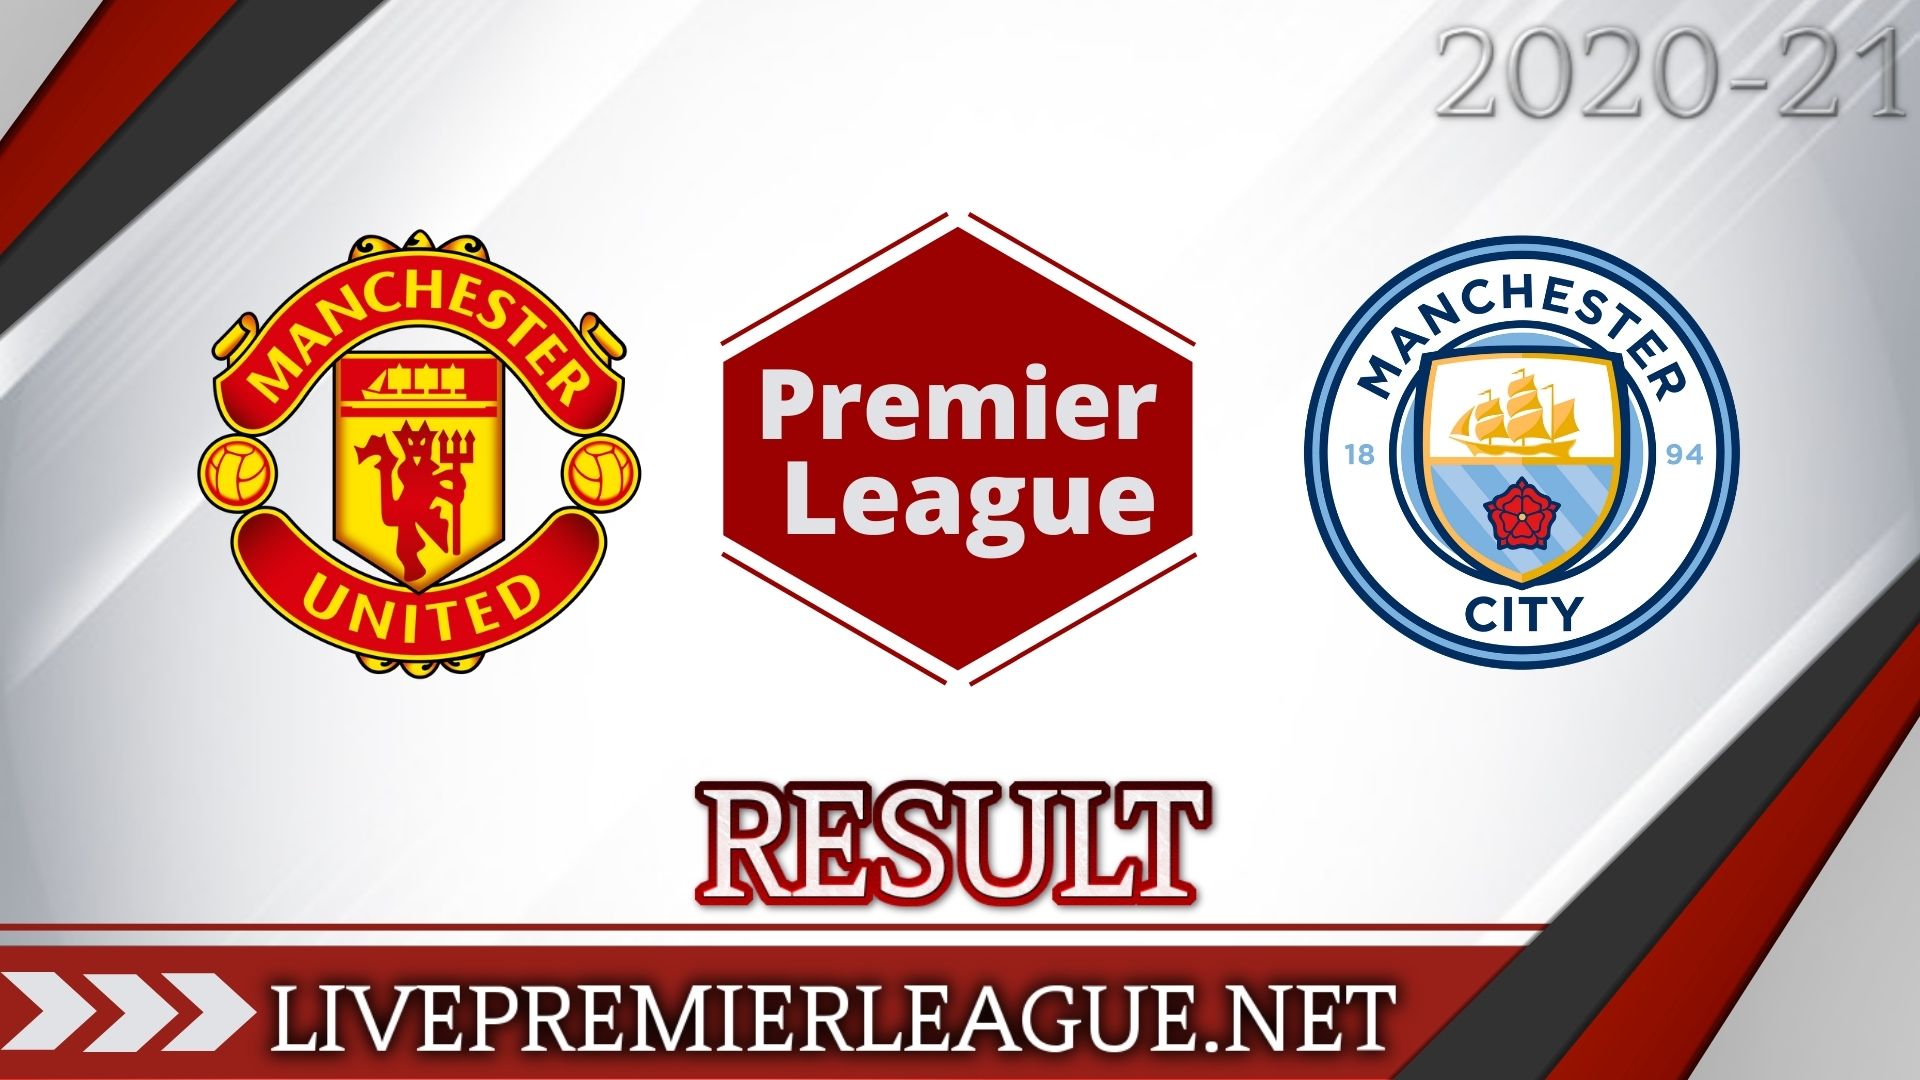 Manchester United Vs Manchester City | Week 12 Result 2020